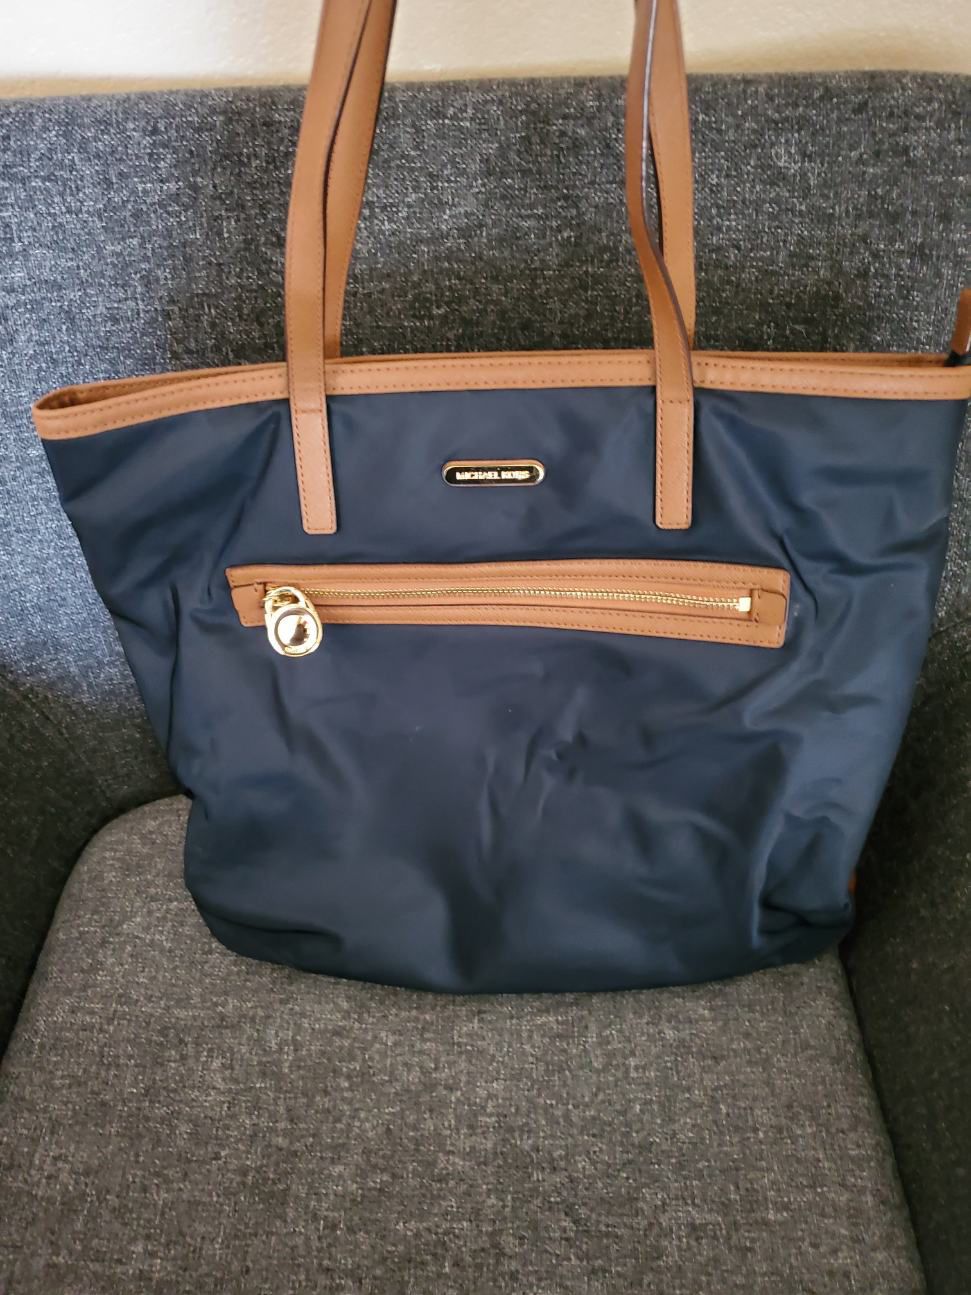 Michael Kors Tote Purse for Sale in Concord, CA - OfferUp